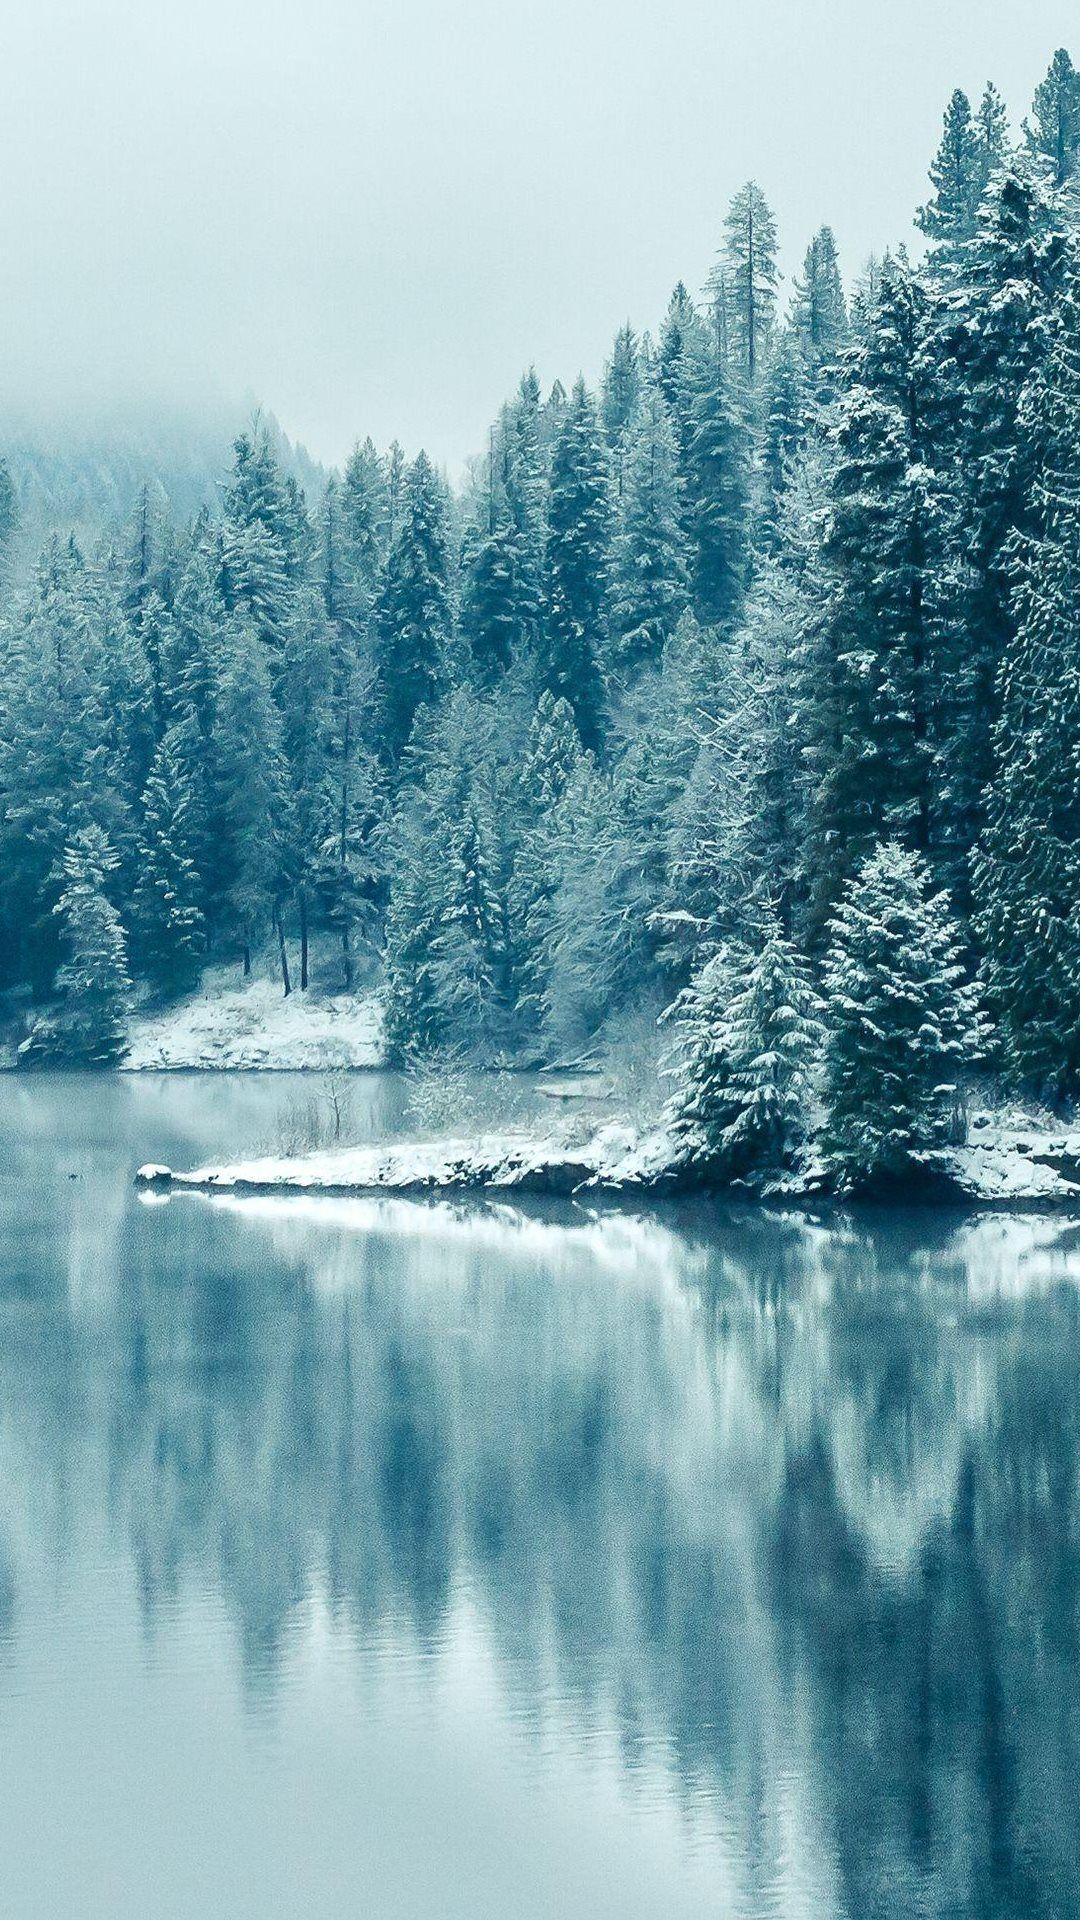 Turquoise Pine Forest Lake Snow. iPhone wallpaper winter, Winter wallpaper, Winter wallpaper hd